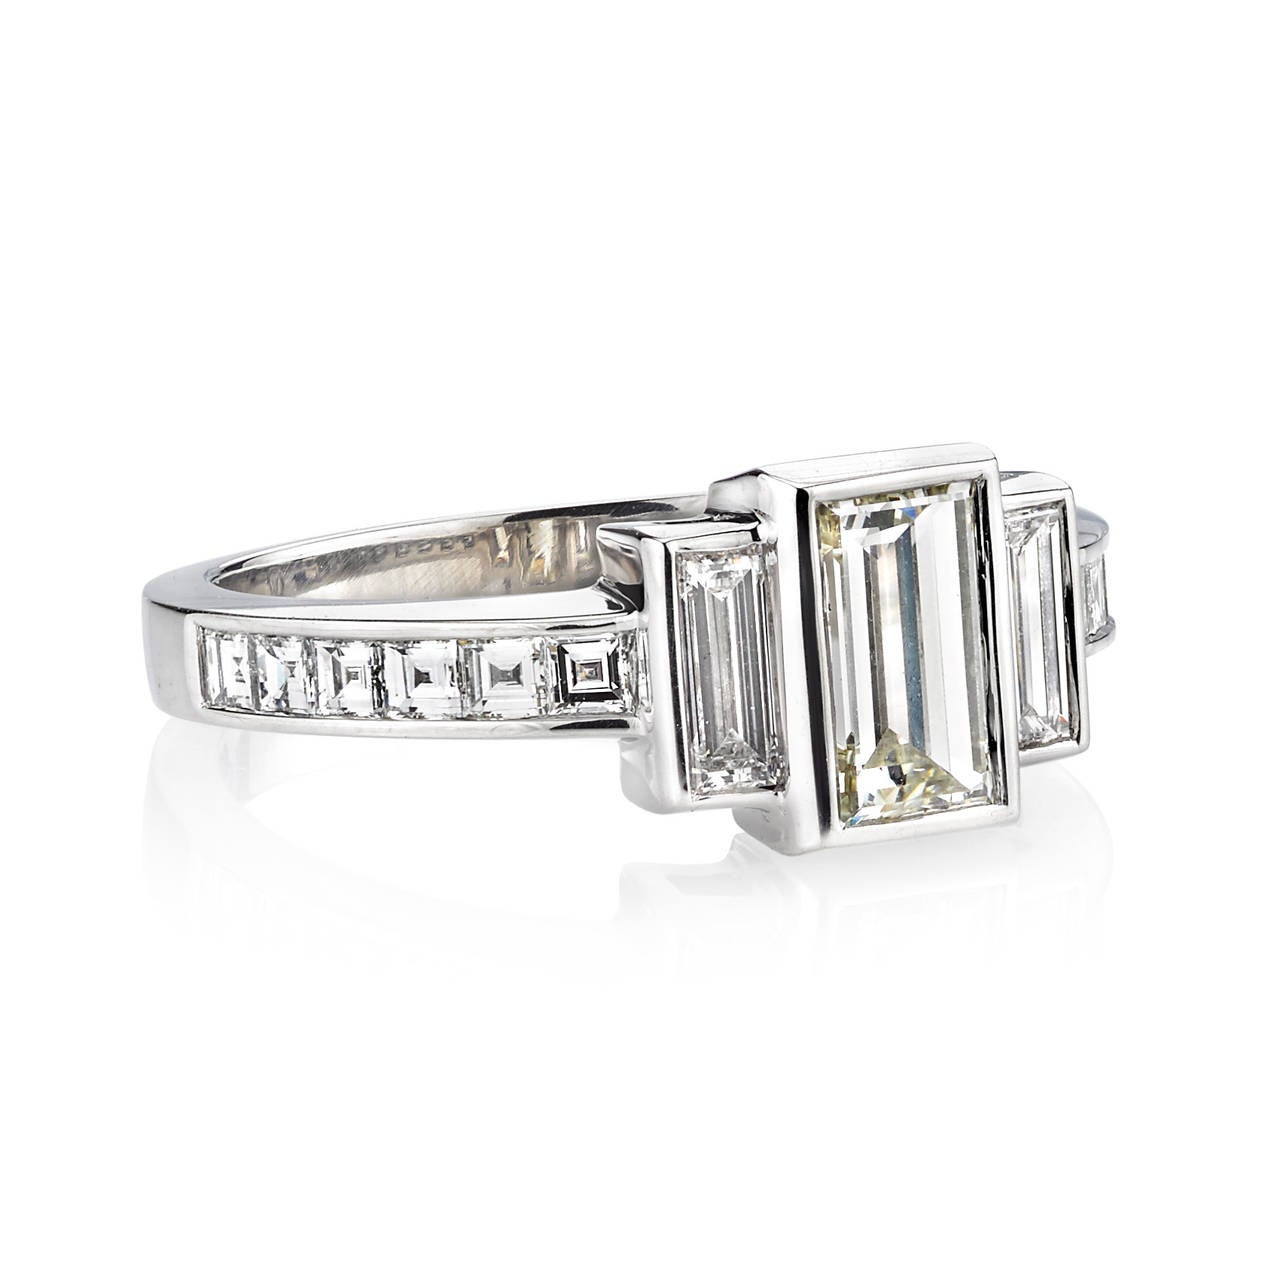 0.88ct L/VS1 GIA certified emerald cut diamond with 0.72ctw mixed cut accent diamonds set in a handcrafted platinum mounting.

